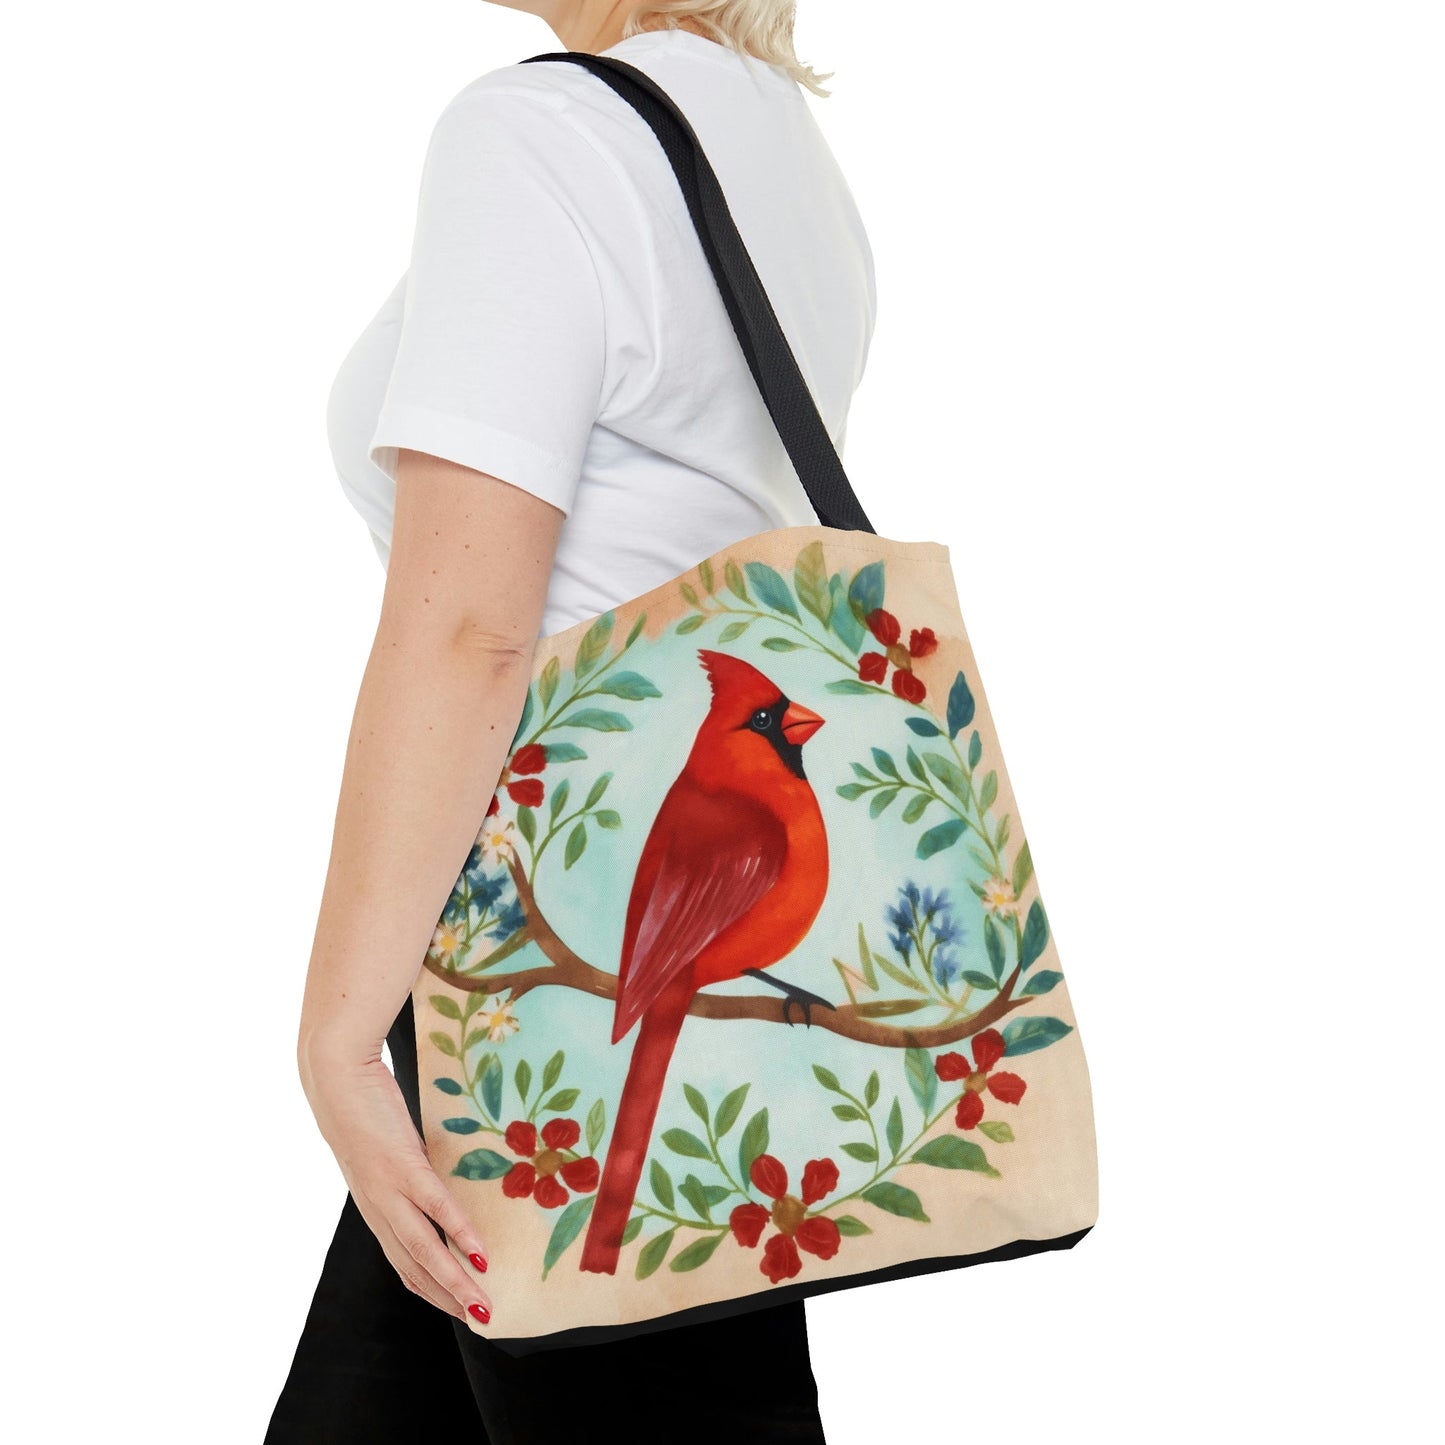 Cardinal Tote Bag - Cute Cottagecore Totebag Makes the Perfect Gift